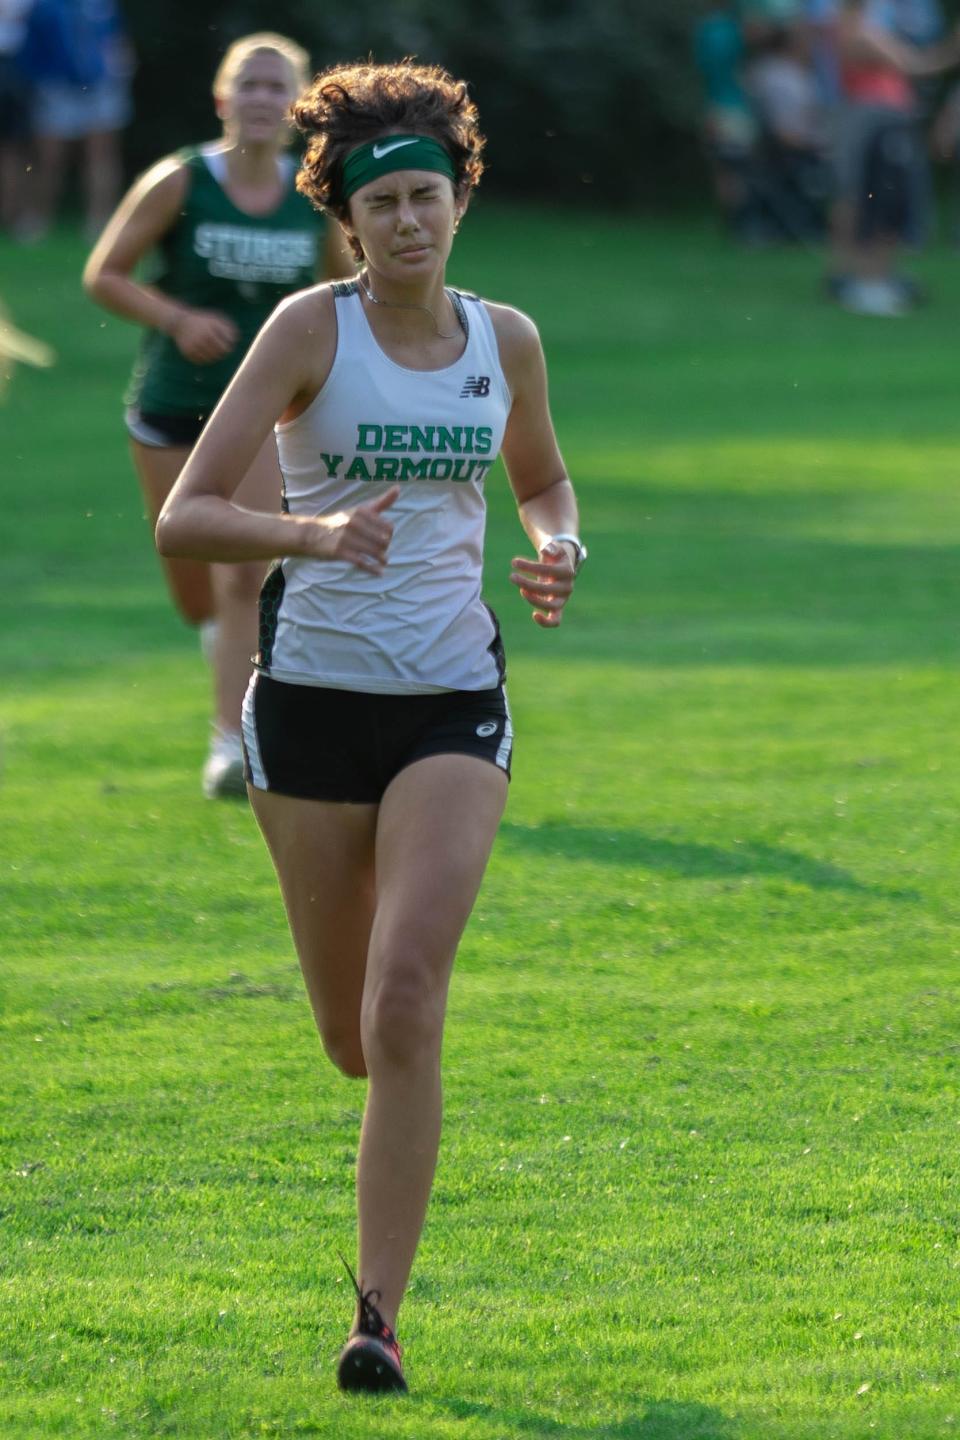 Injury prevented Rose Karow, D-Y's best runner and a junior transfer student from Colorado, from racing against Barnstable, but she is slated to compete this week against Nauset and Sturgis East.